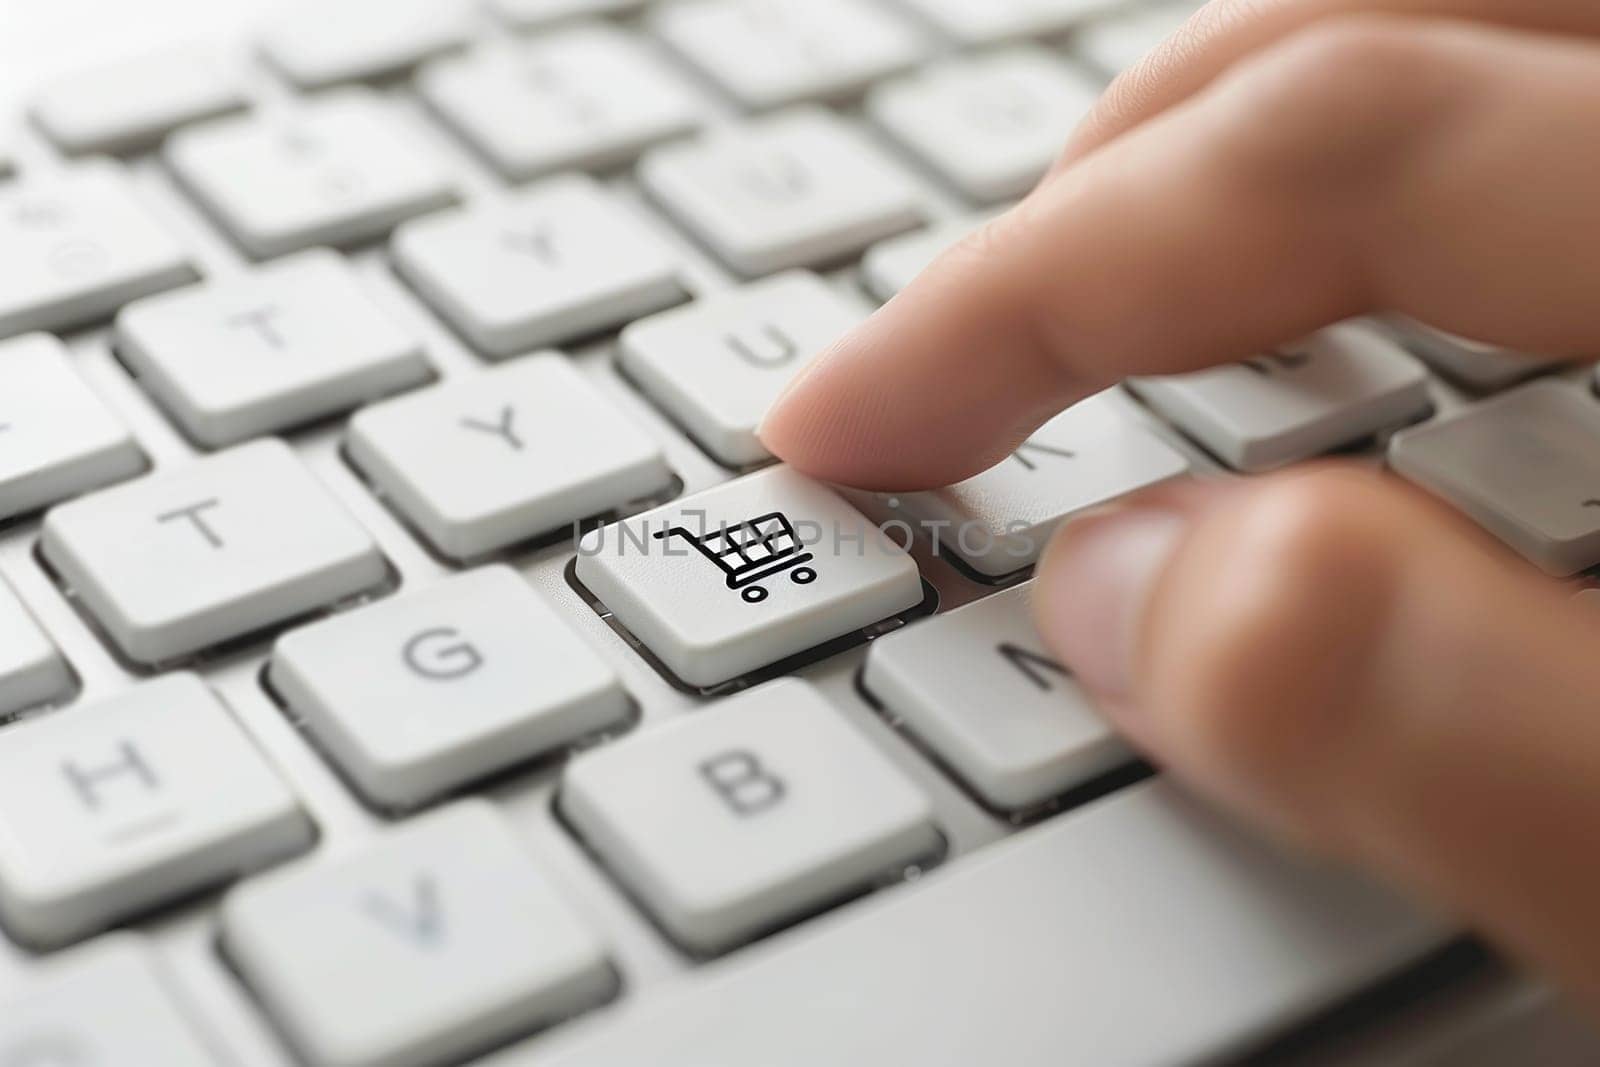 A person is pointing to a shopping cart key on a keyboard by golfmerrymaker